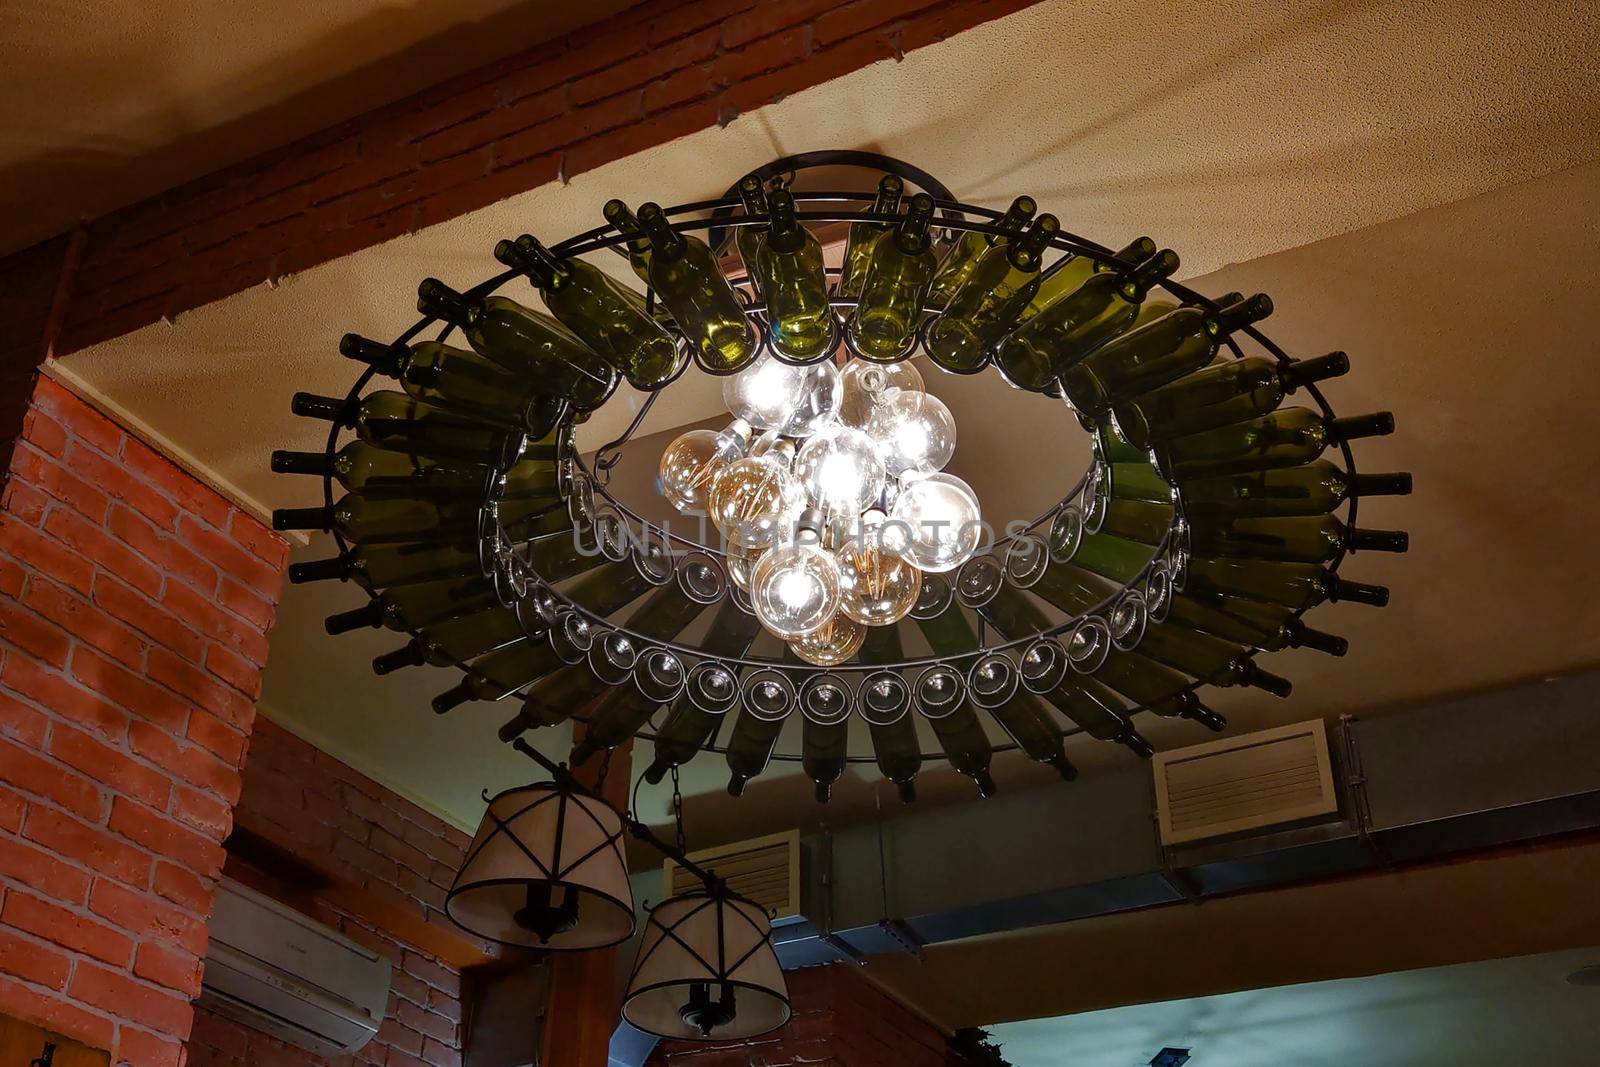 Beautifully decorated bottle chandelier in a bar or restaurant. by kip02kas